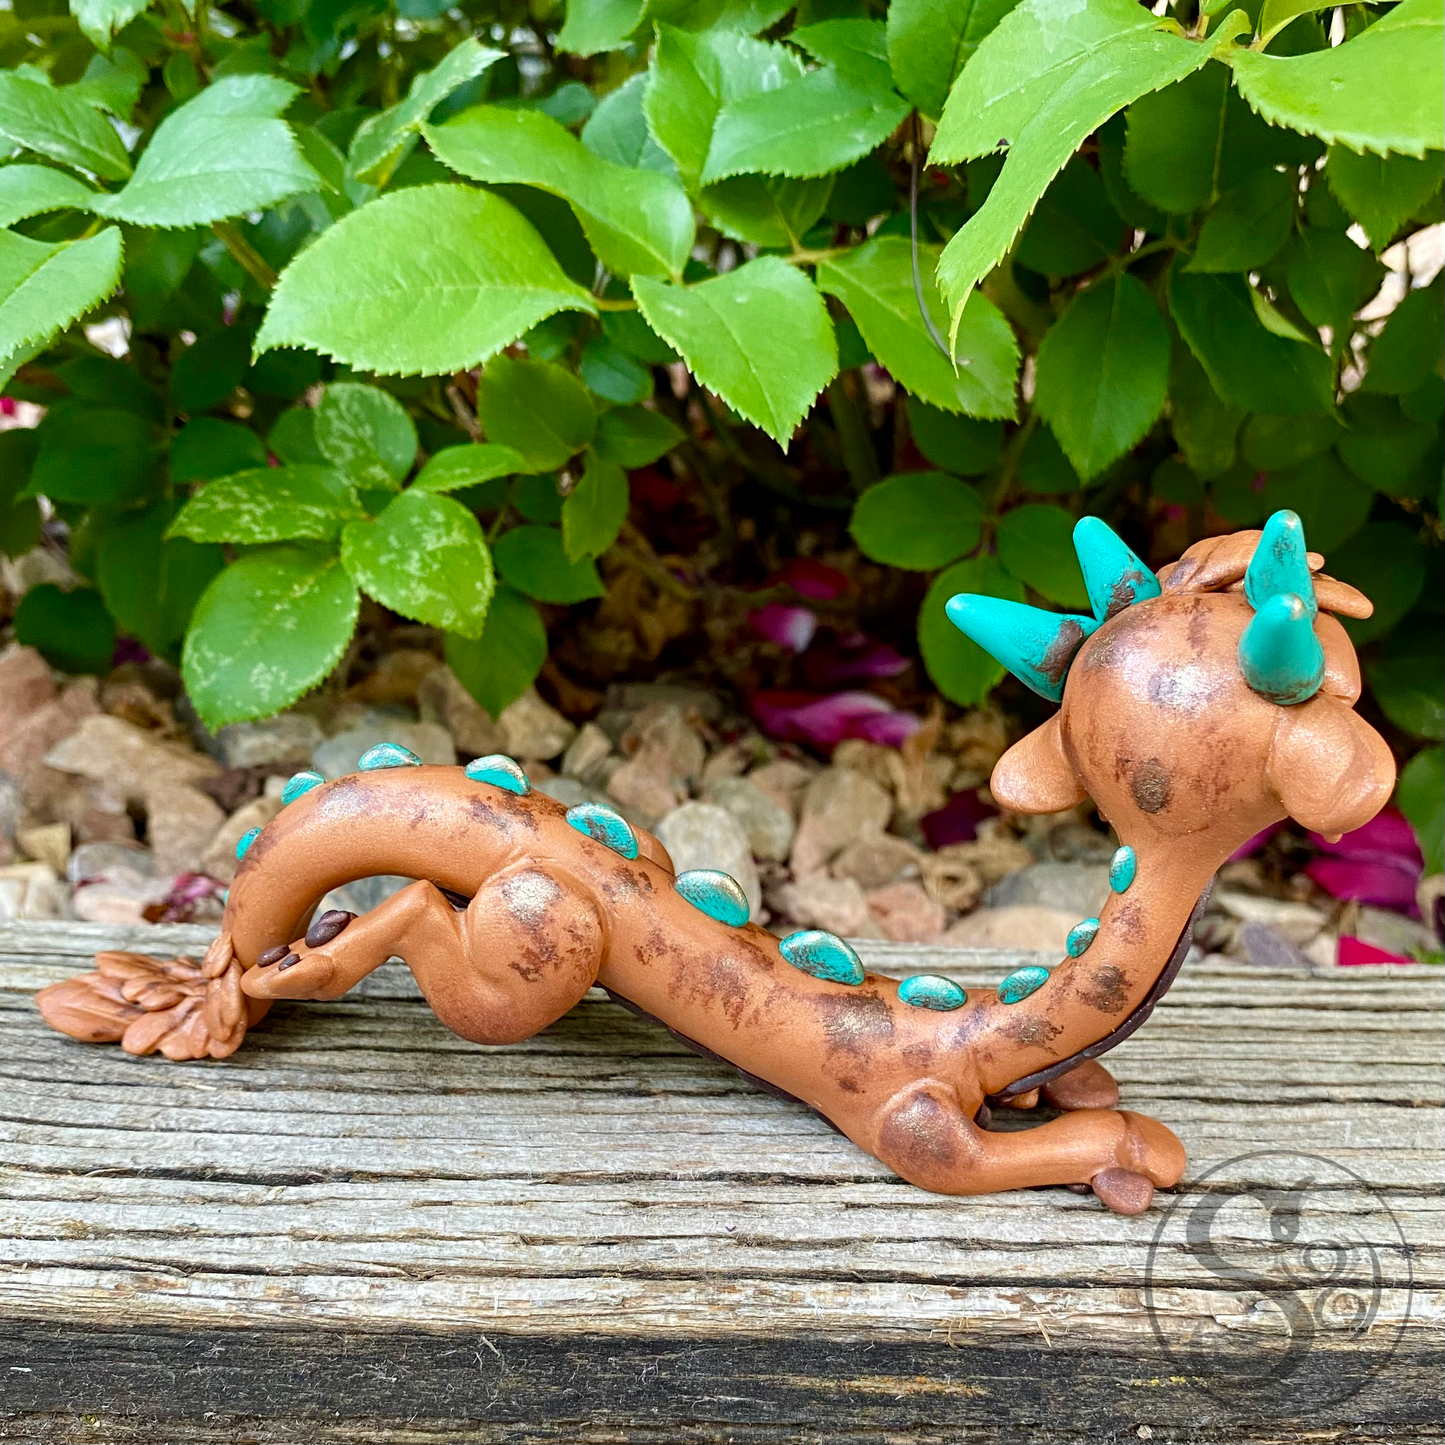 Copper and Teal Dragon